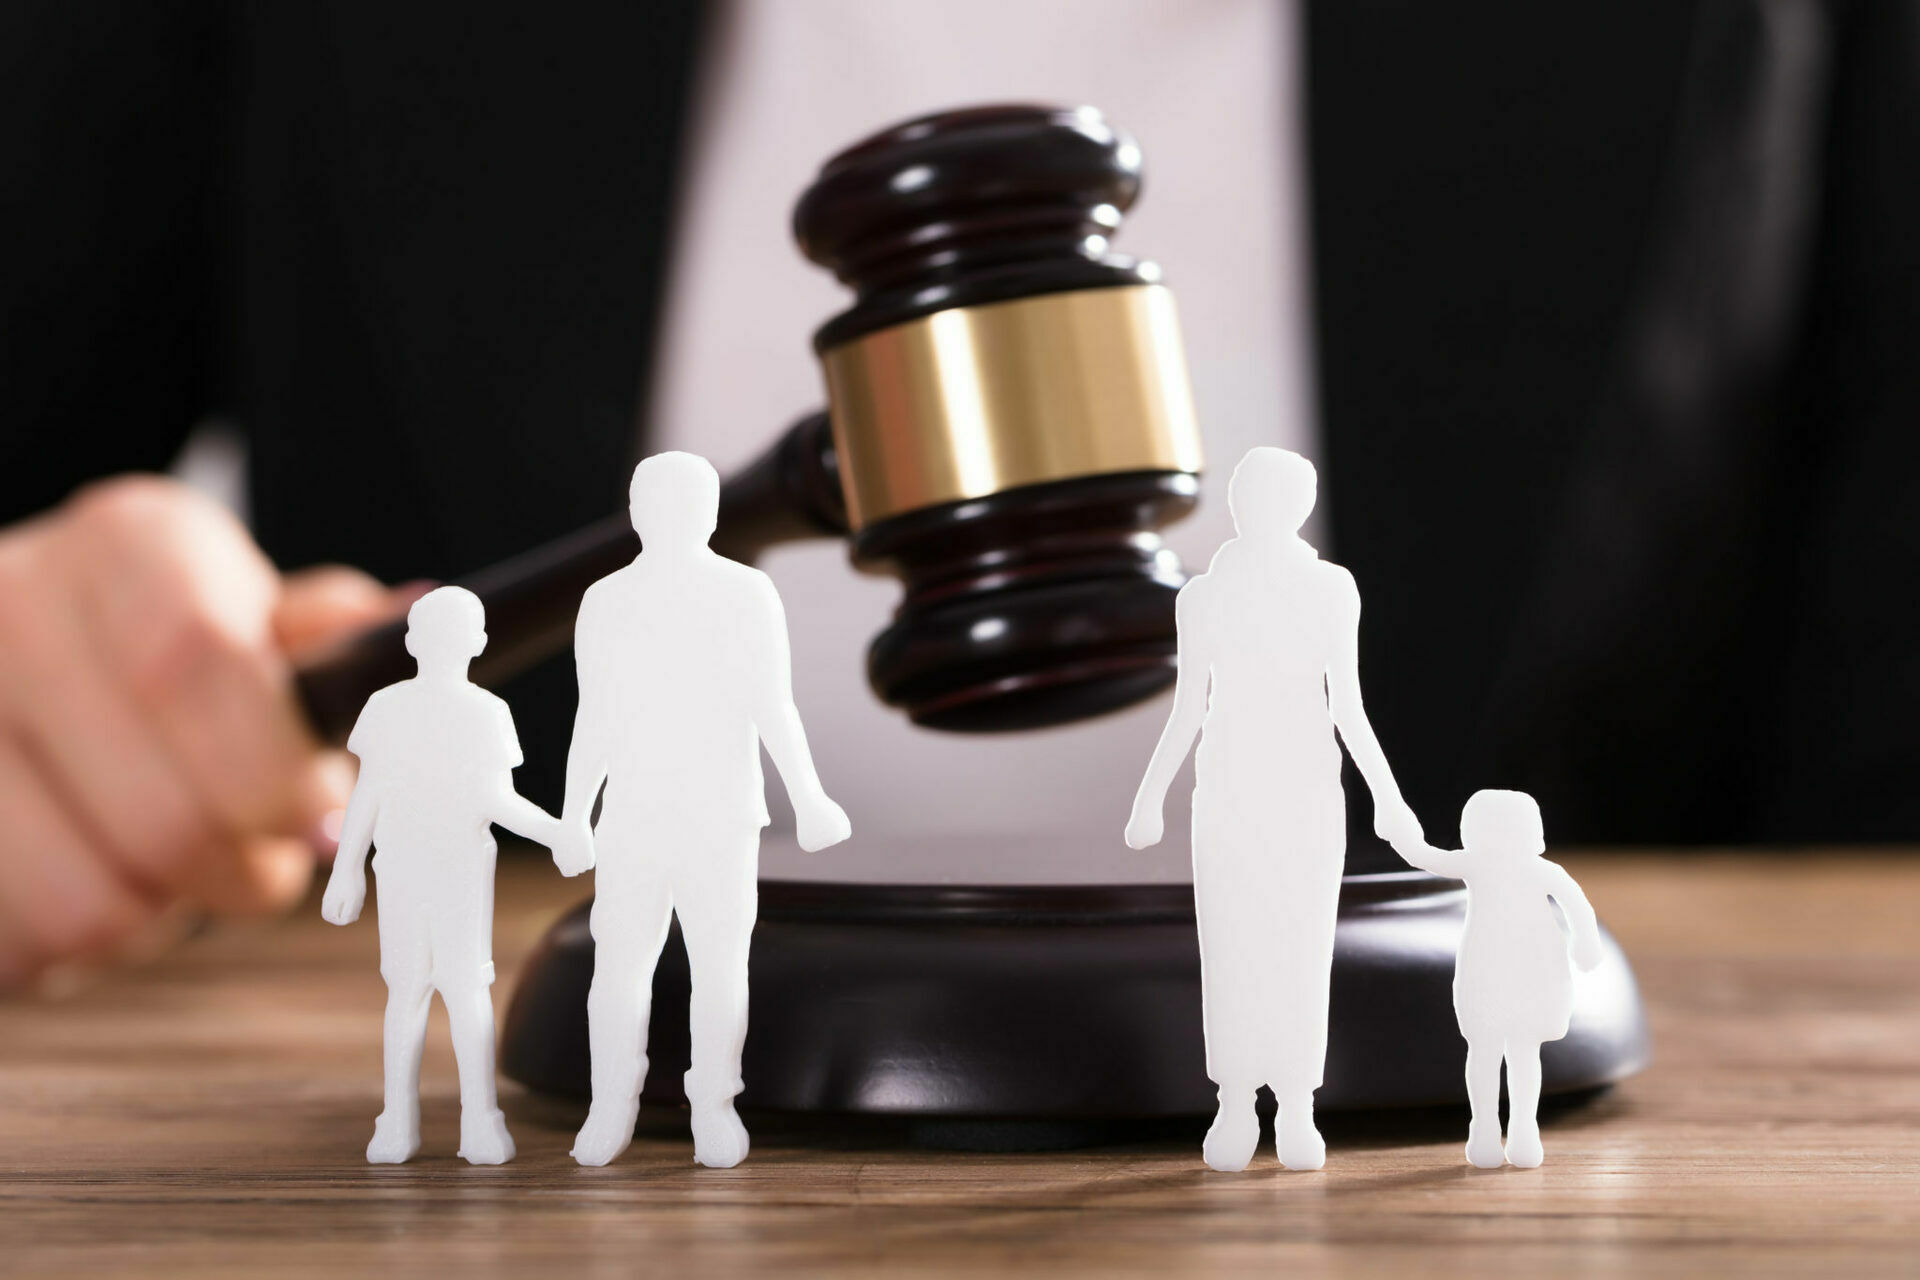 If you have lived enough in a family - pay! Why courts charge with the alimony for other people's children